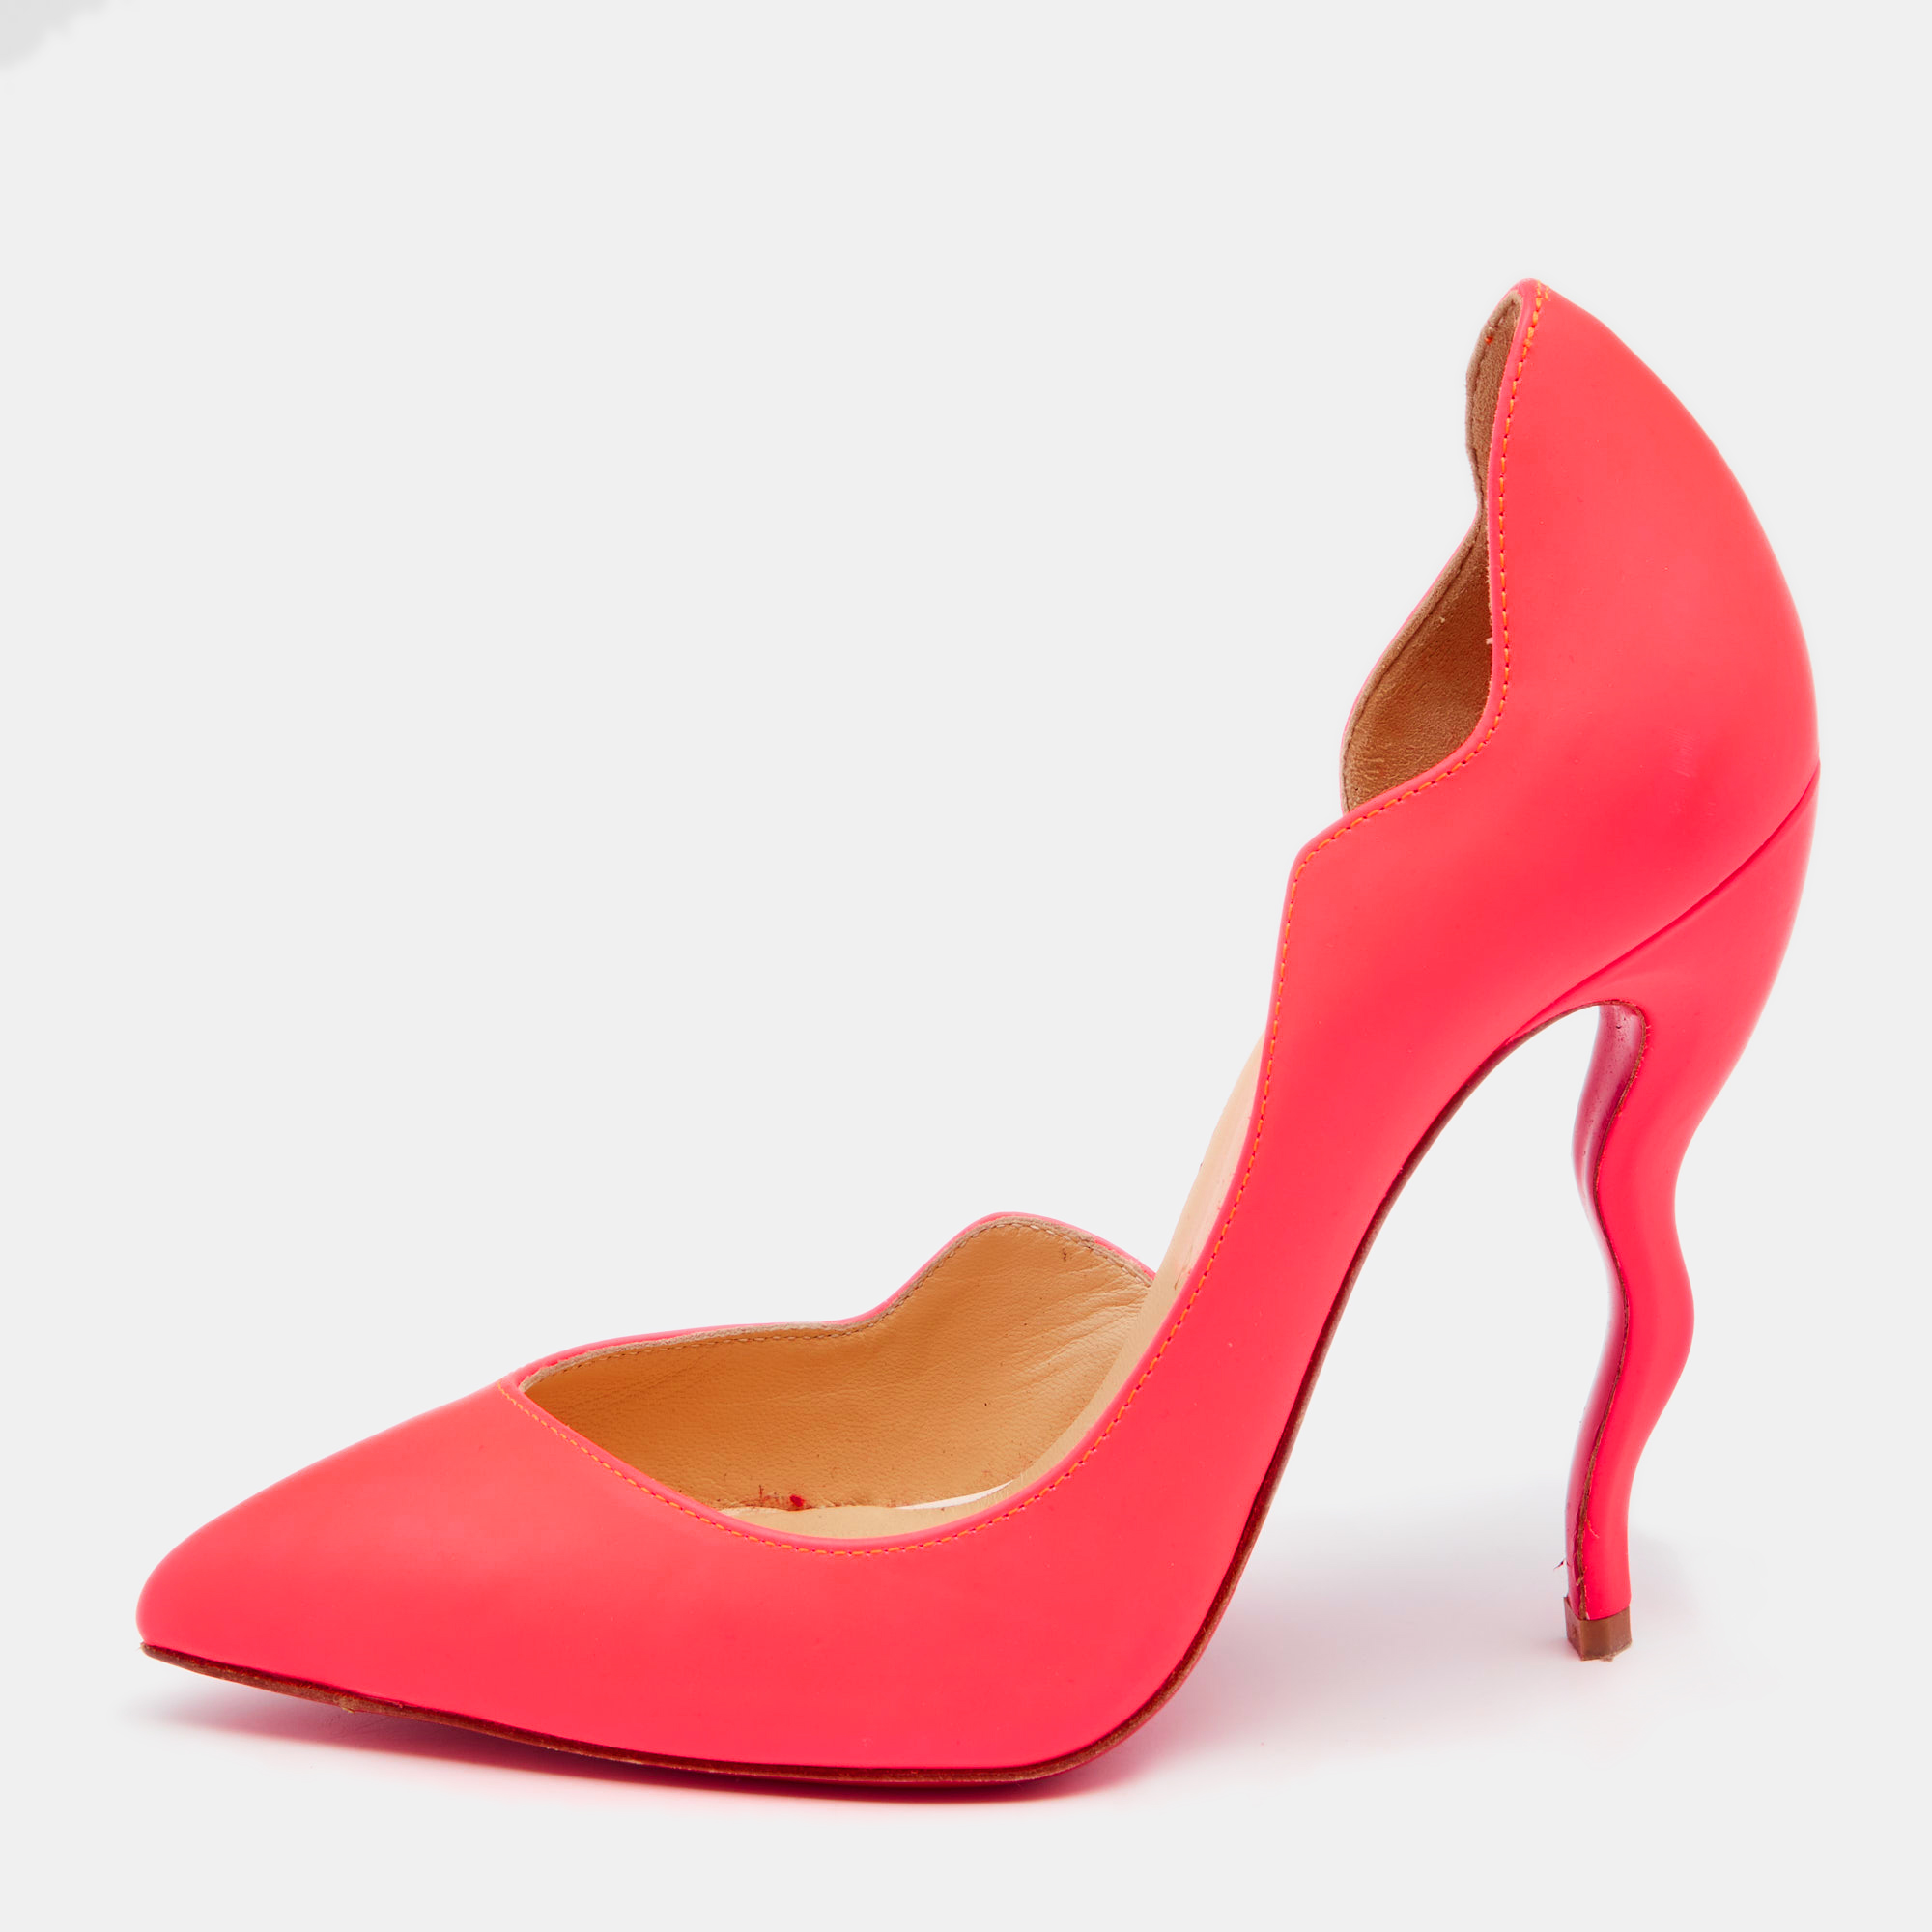 Christian louboutin neon pink leather dalida d'orsay pumps size 35